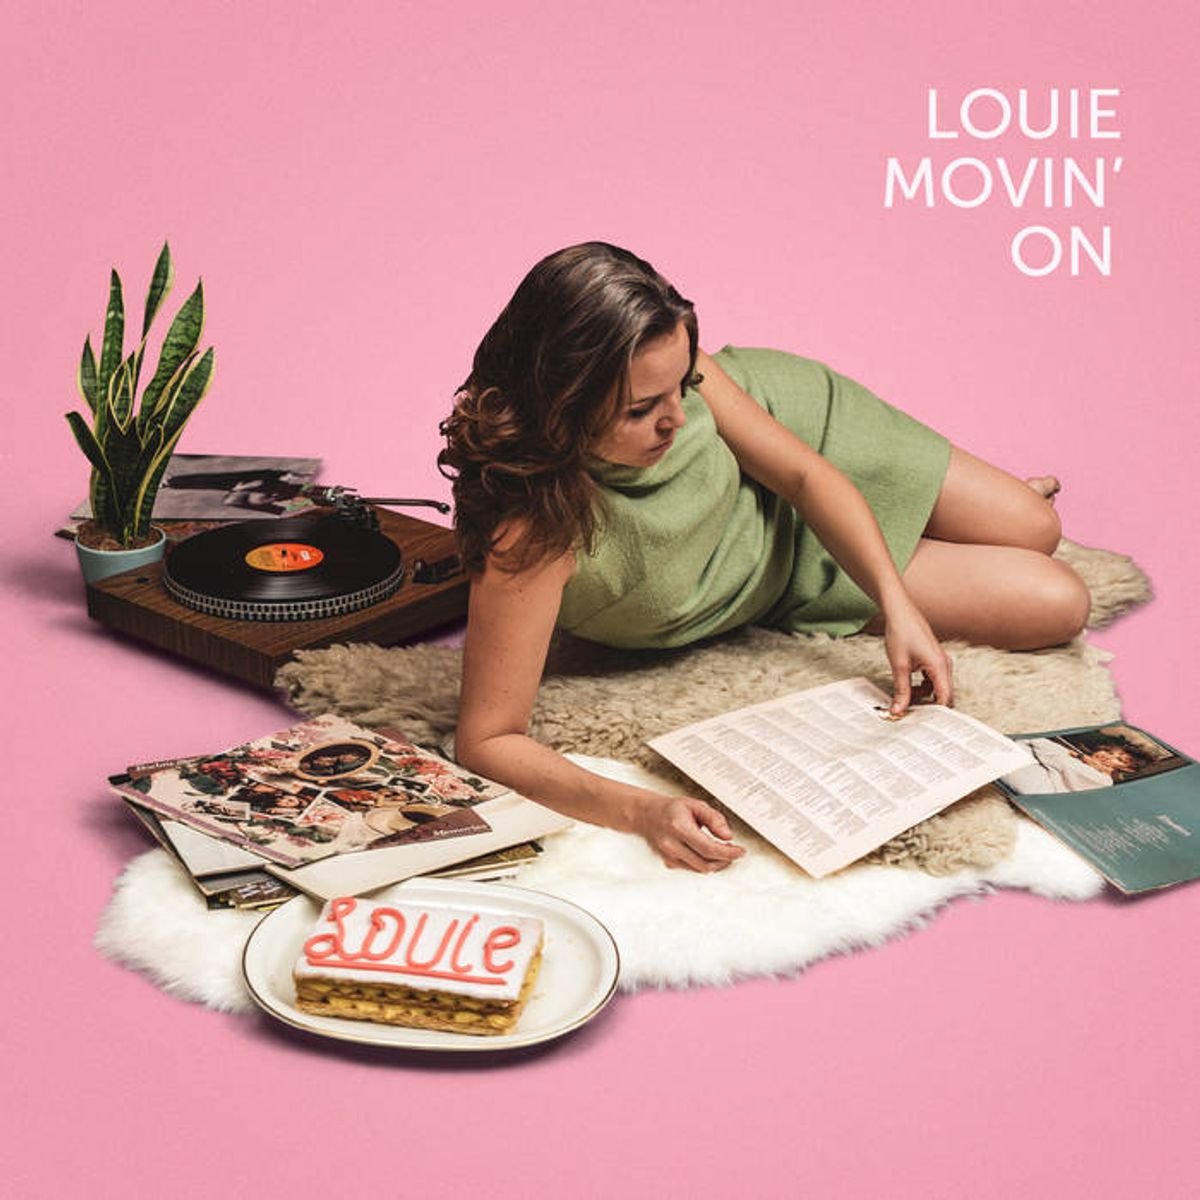 Louie - 'Movin' On'